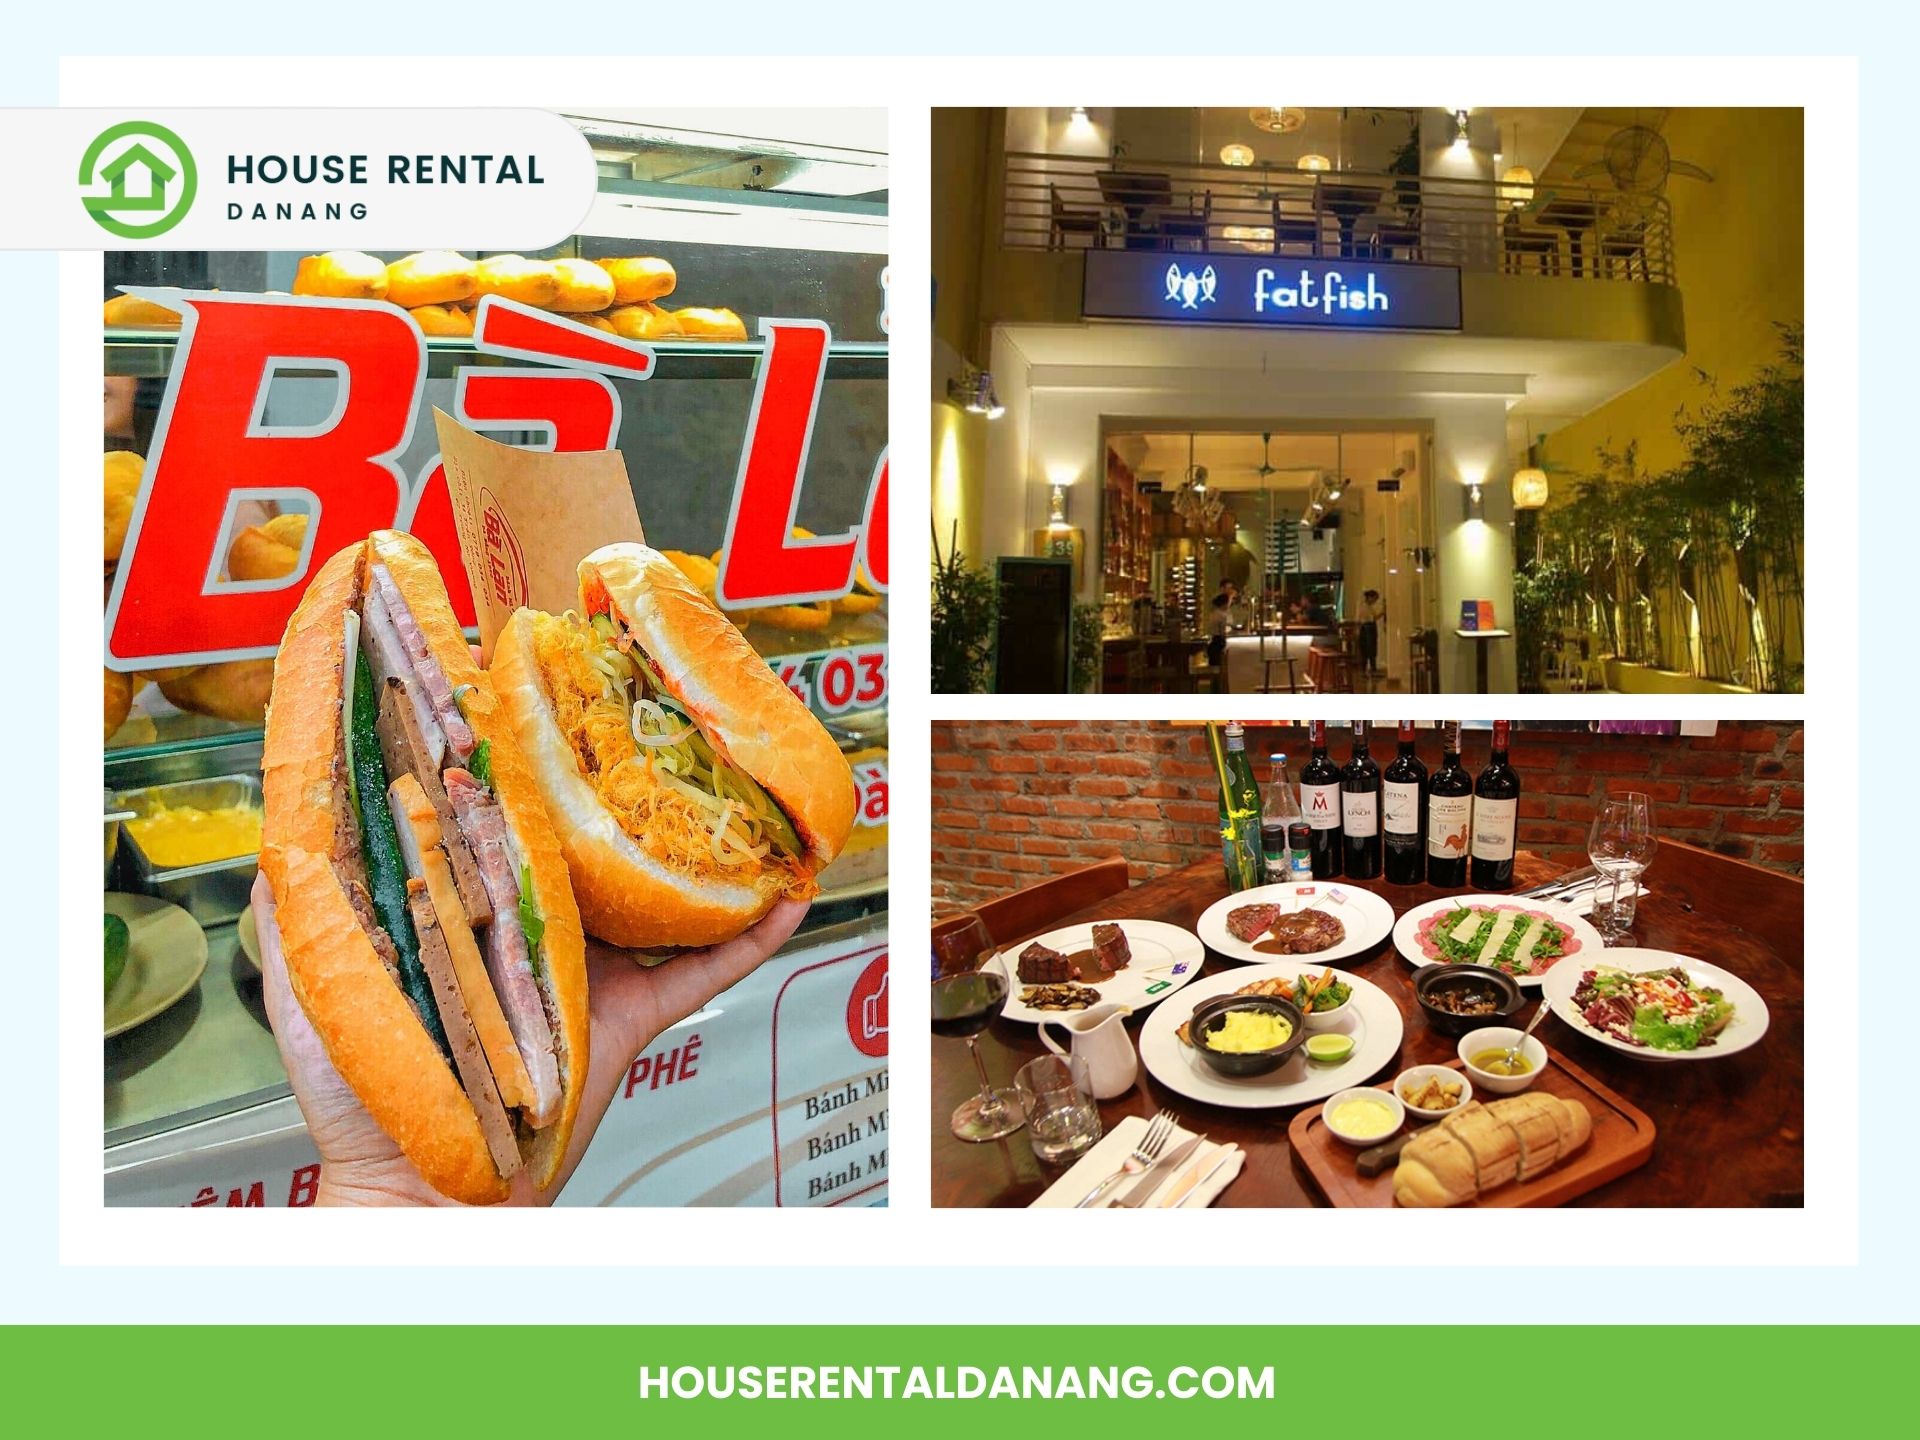 A collage featuring a hand holding a banh mi sandwich, the exterior of "Fatfish" restaurant, and a dining table set with various dishes and wine bottles. The "House Rental Danang" logo and URL are at the top and bottom, along with an image of the Museum of Cham Sculpture in Da Nang.